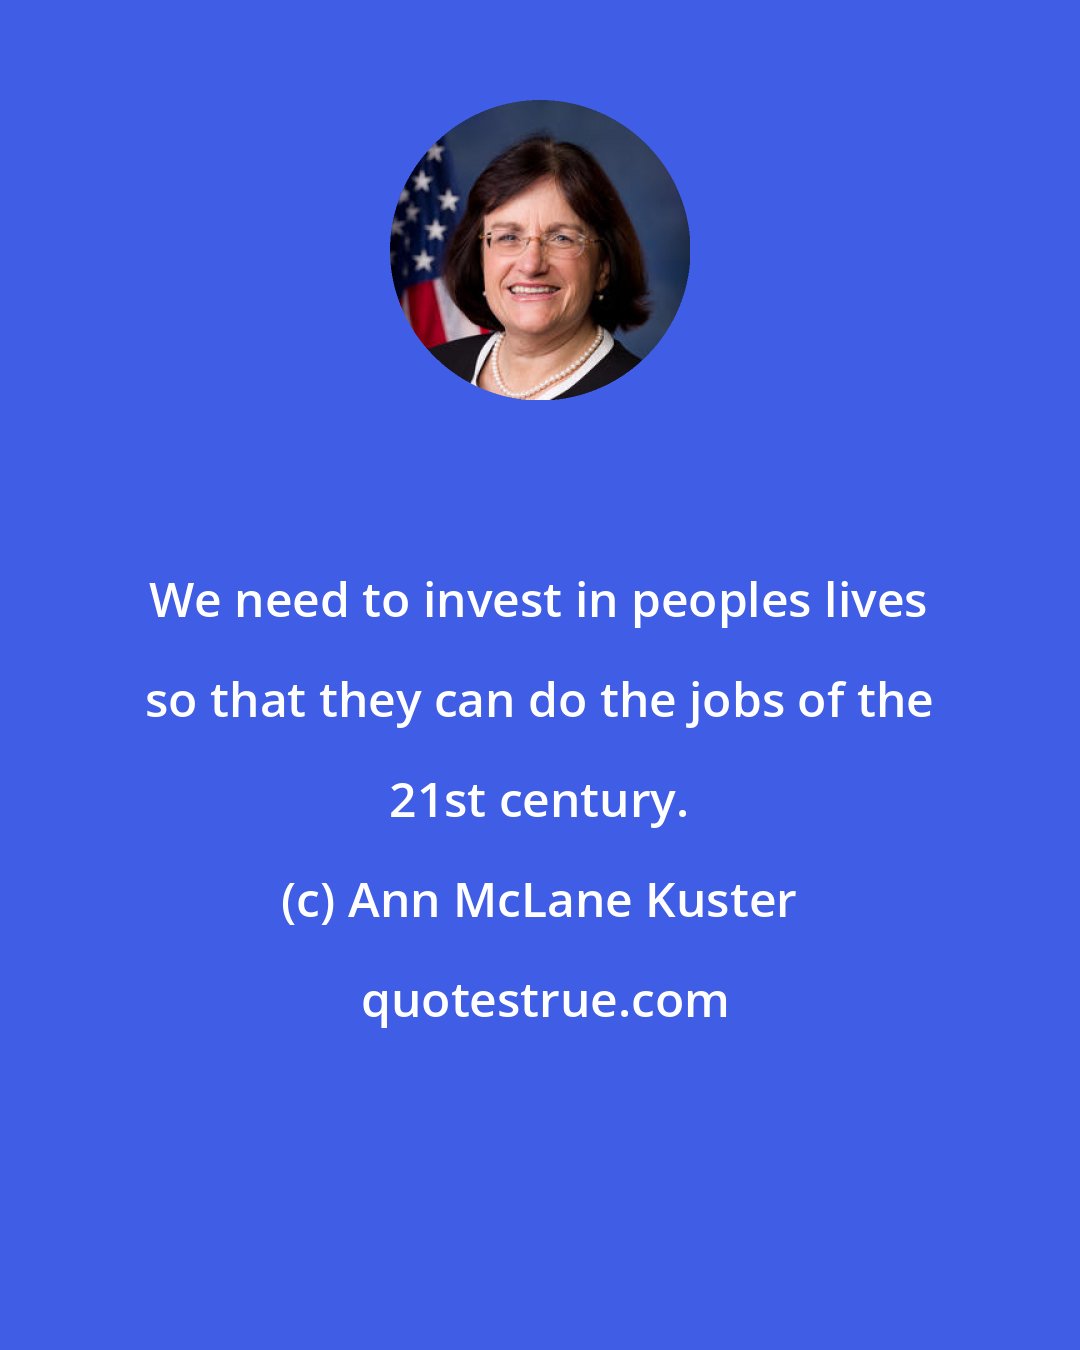 Ann McLane Kuster: We need to invest in peoples lives so that they can do the jobs of the 21st century.